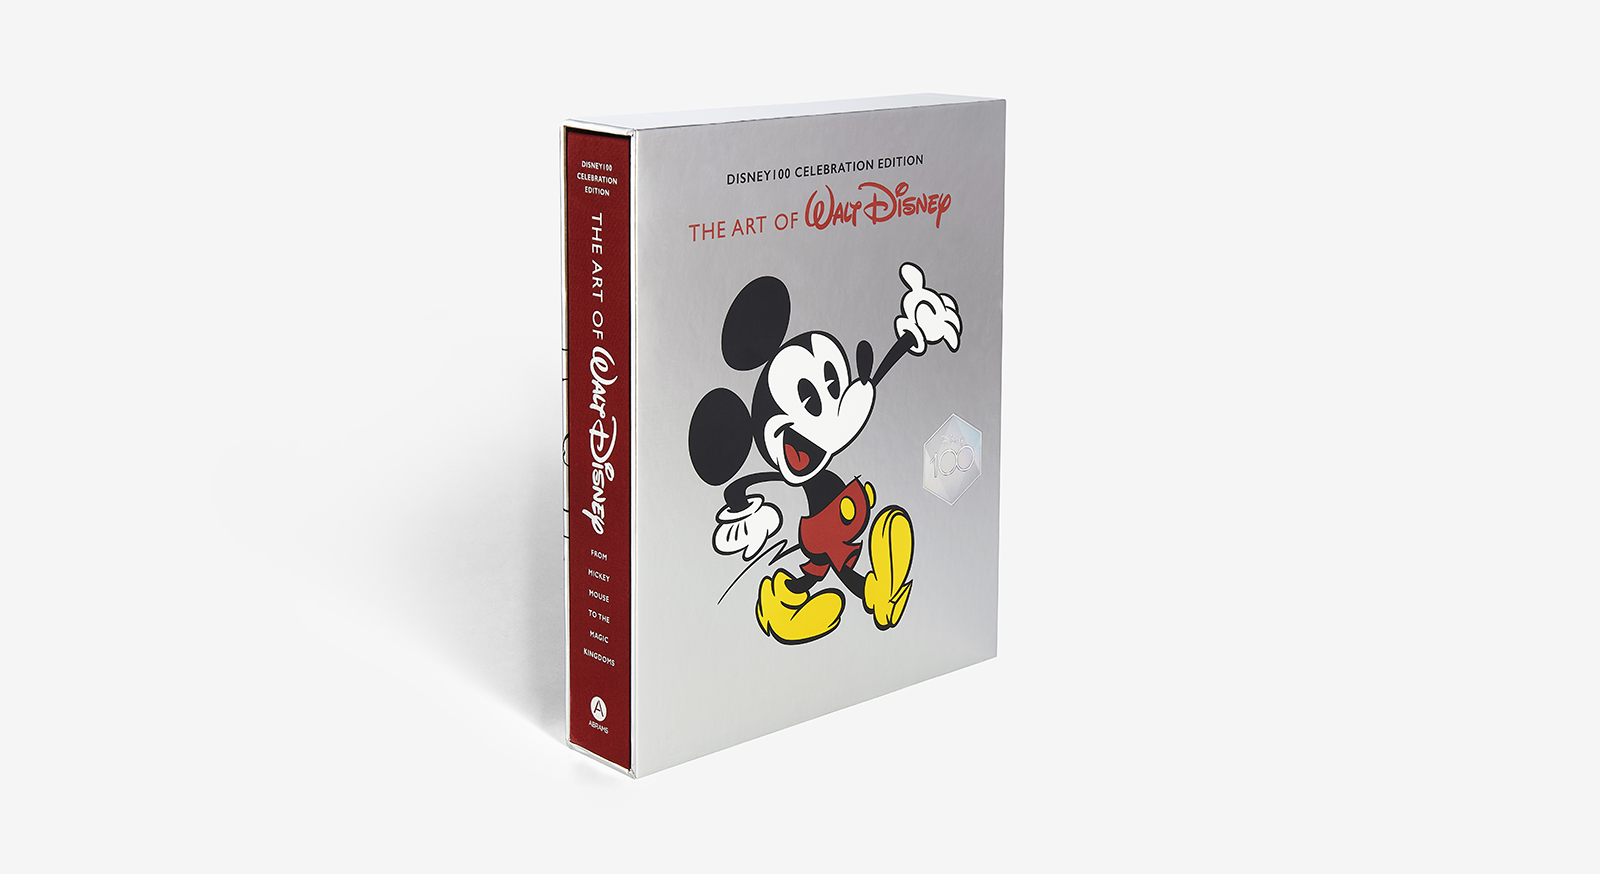 The Art of Walt Disney: From Mickey Mouse to the Magic Kingdoms and Beyond ( Disney 100 Celebration Edition) (Hardcover)